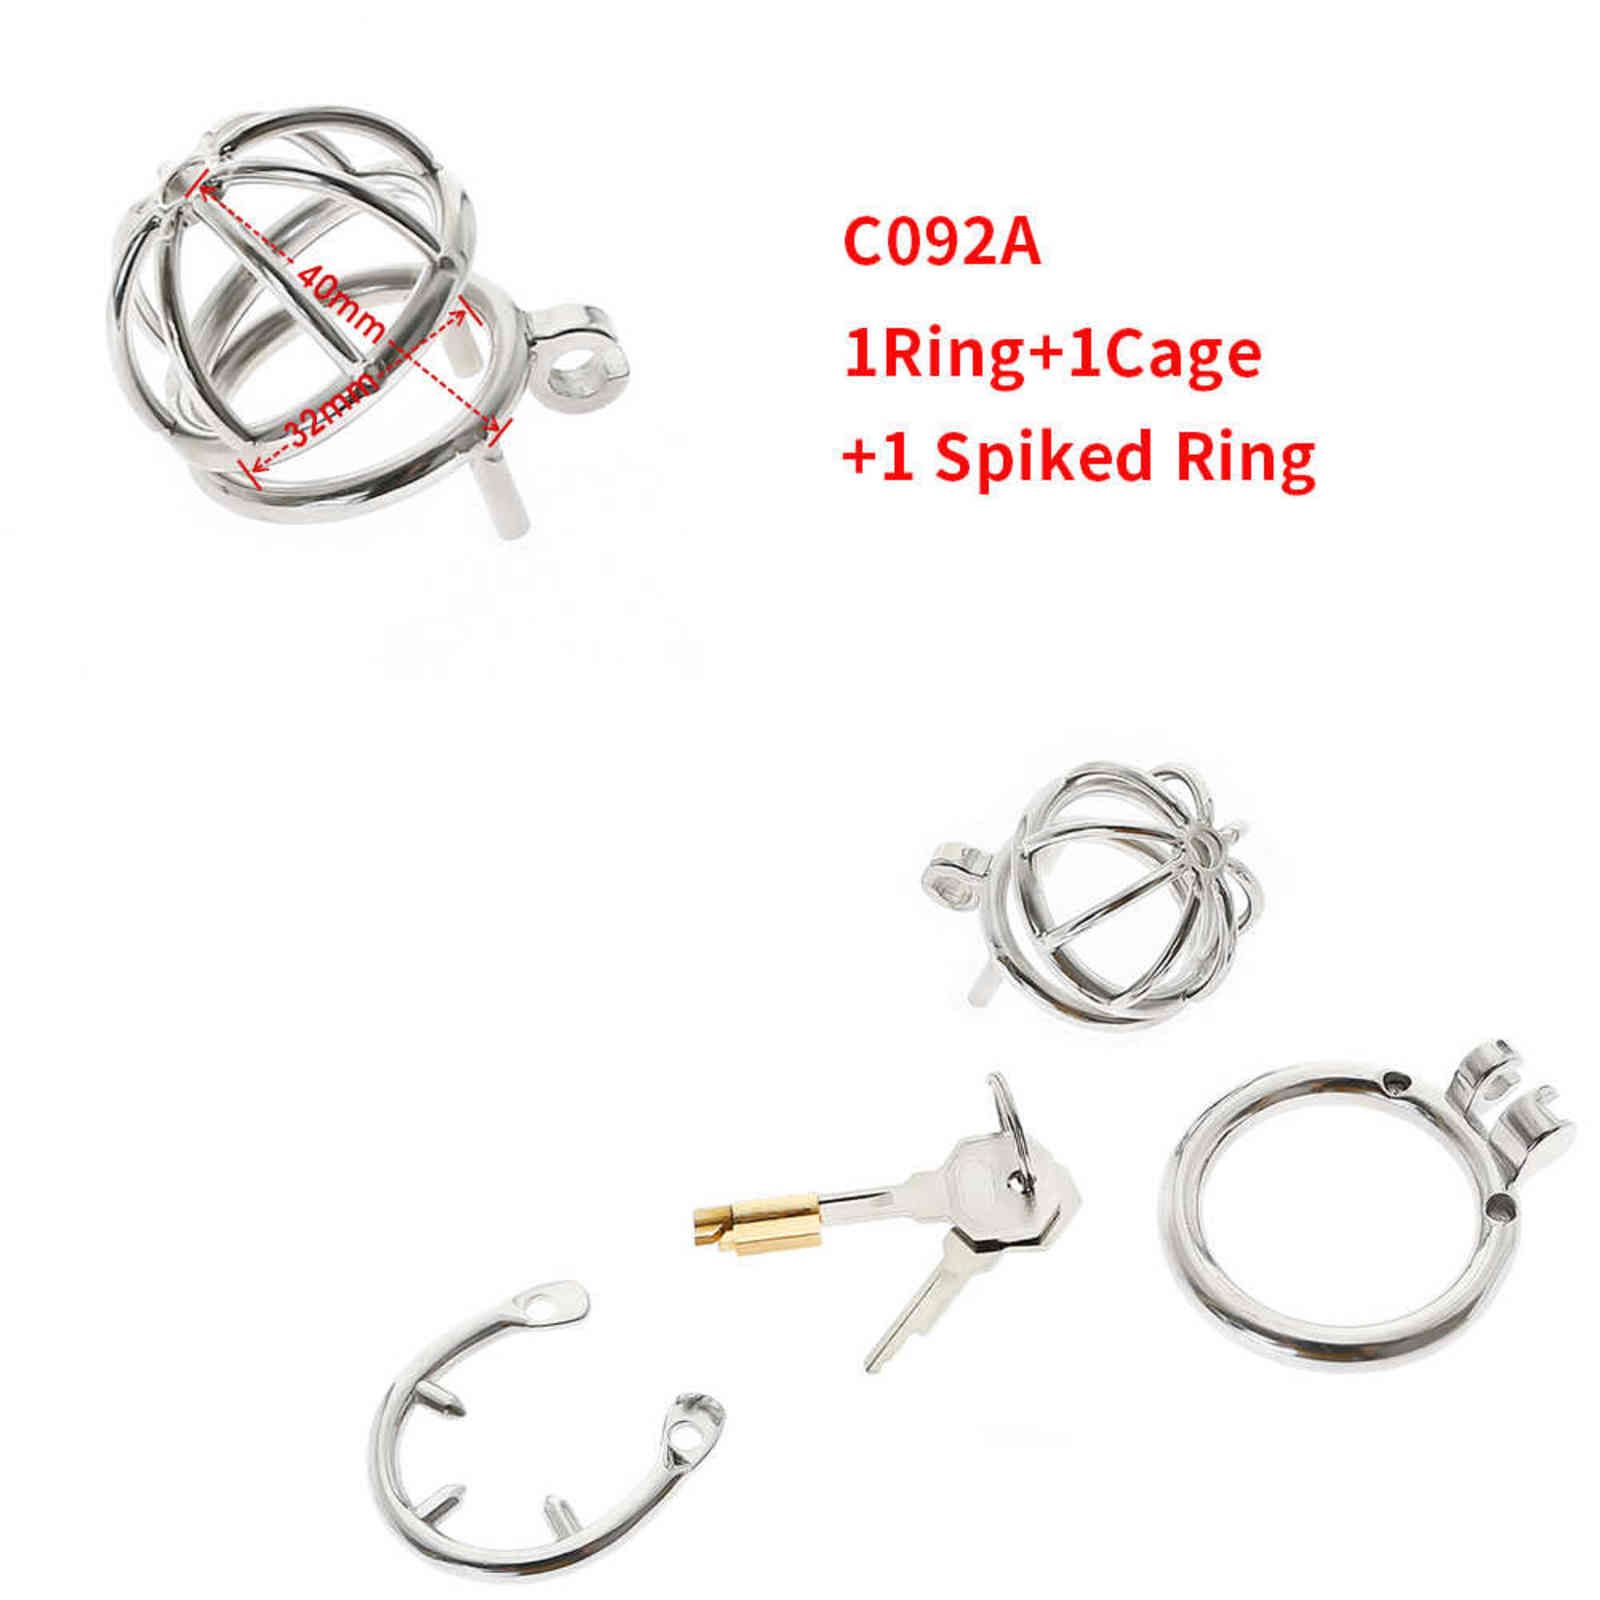 C092a-50mm ring